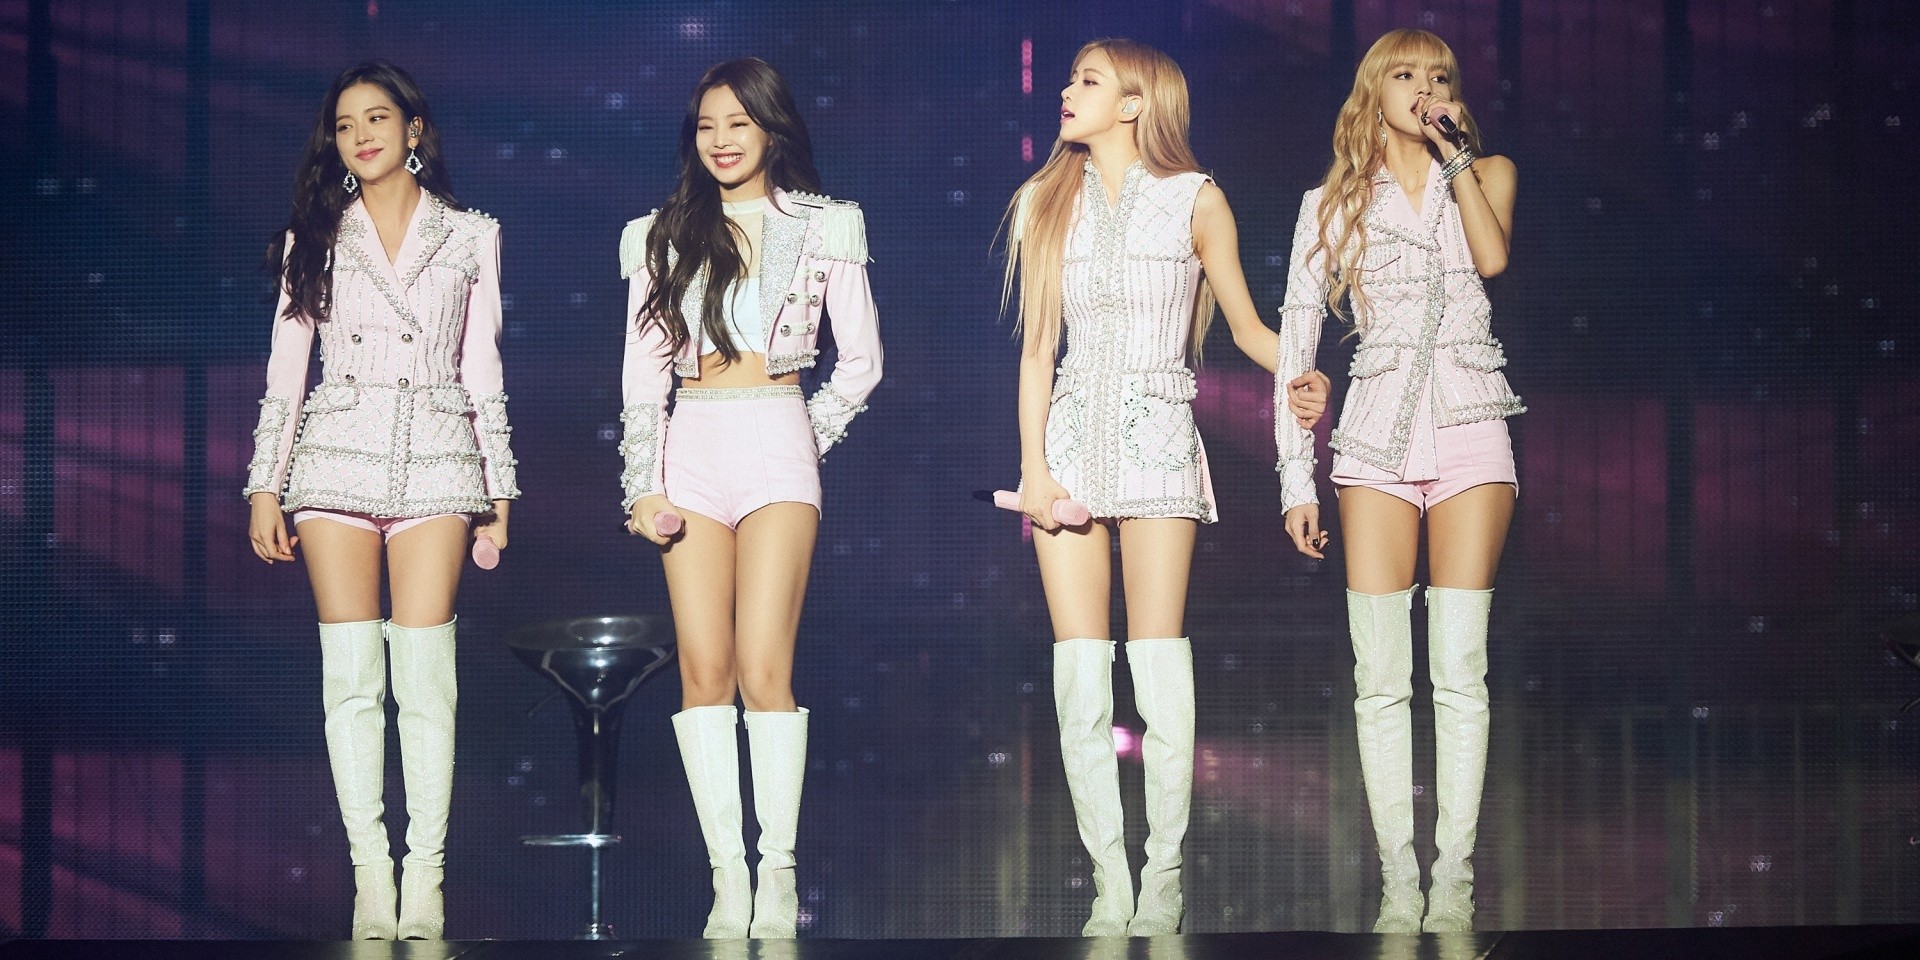 BLACKPINK proves its revolutionary appeal at debut Singapore show – review